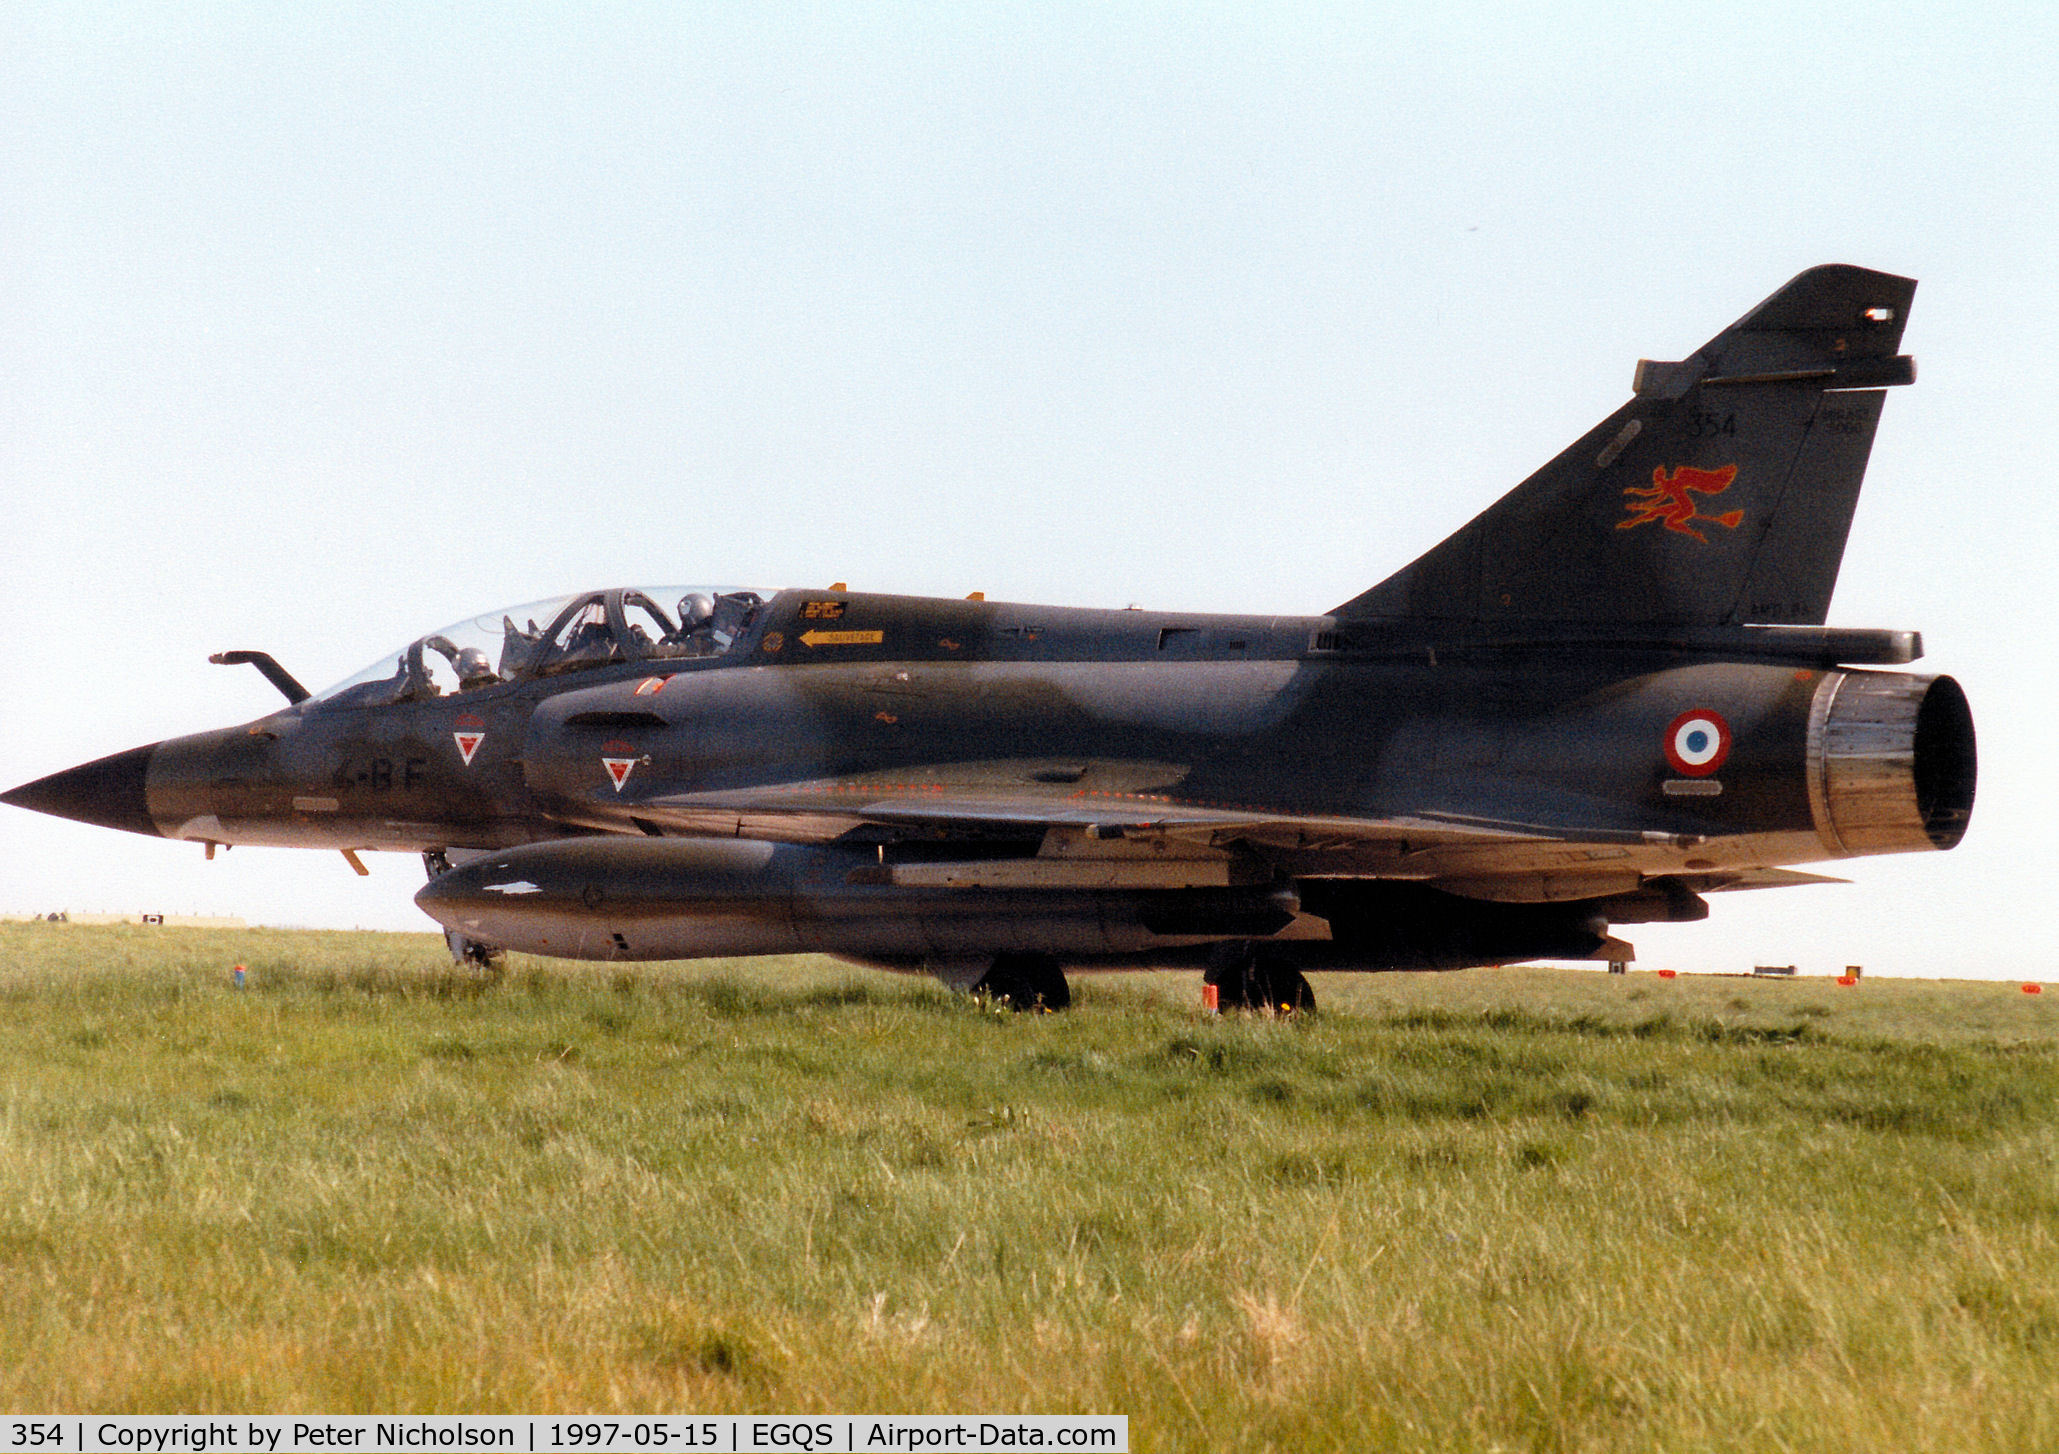 354, Dassault Mirage 2000N C/N 319, Another view of Mirage 2000N, callsign French Air Force 4210 Alpha, taxying to Runway 5 at RAF Lossiemouth in the Summer of 1997.